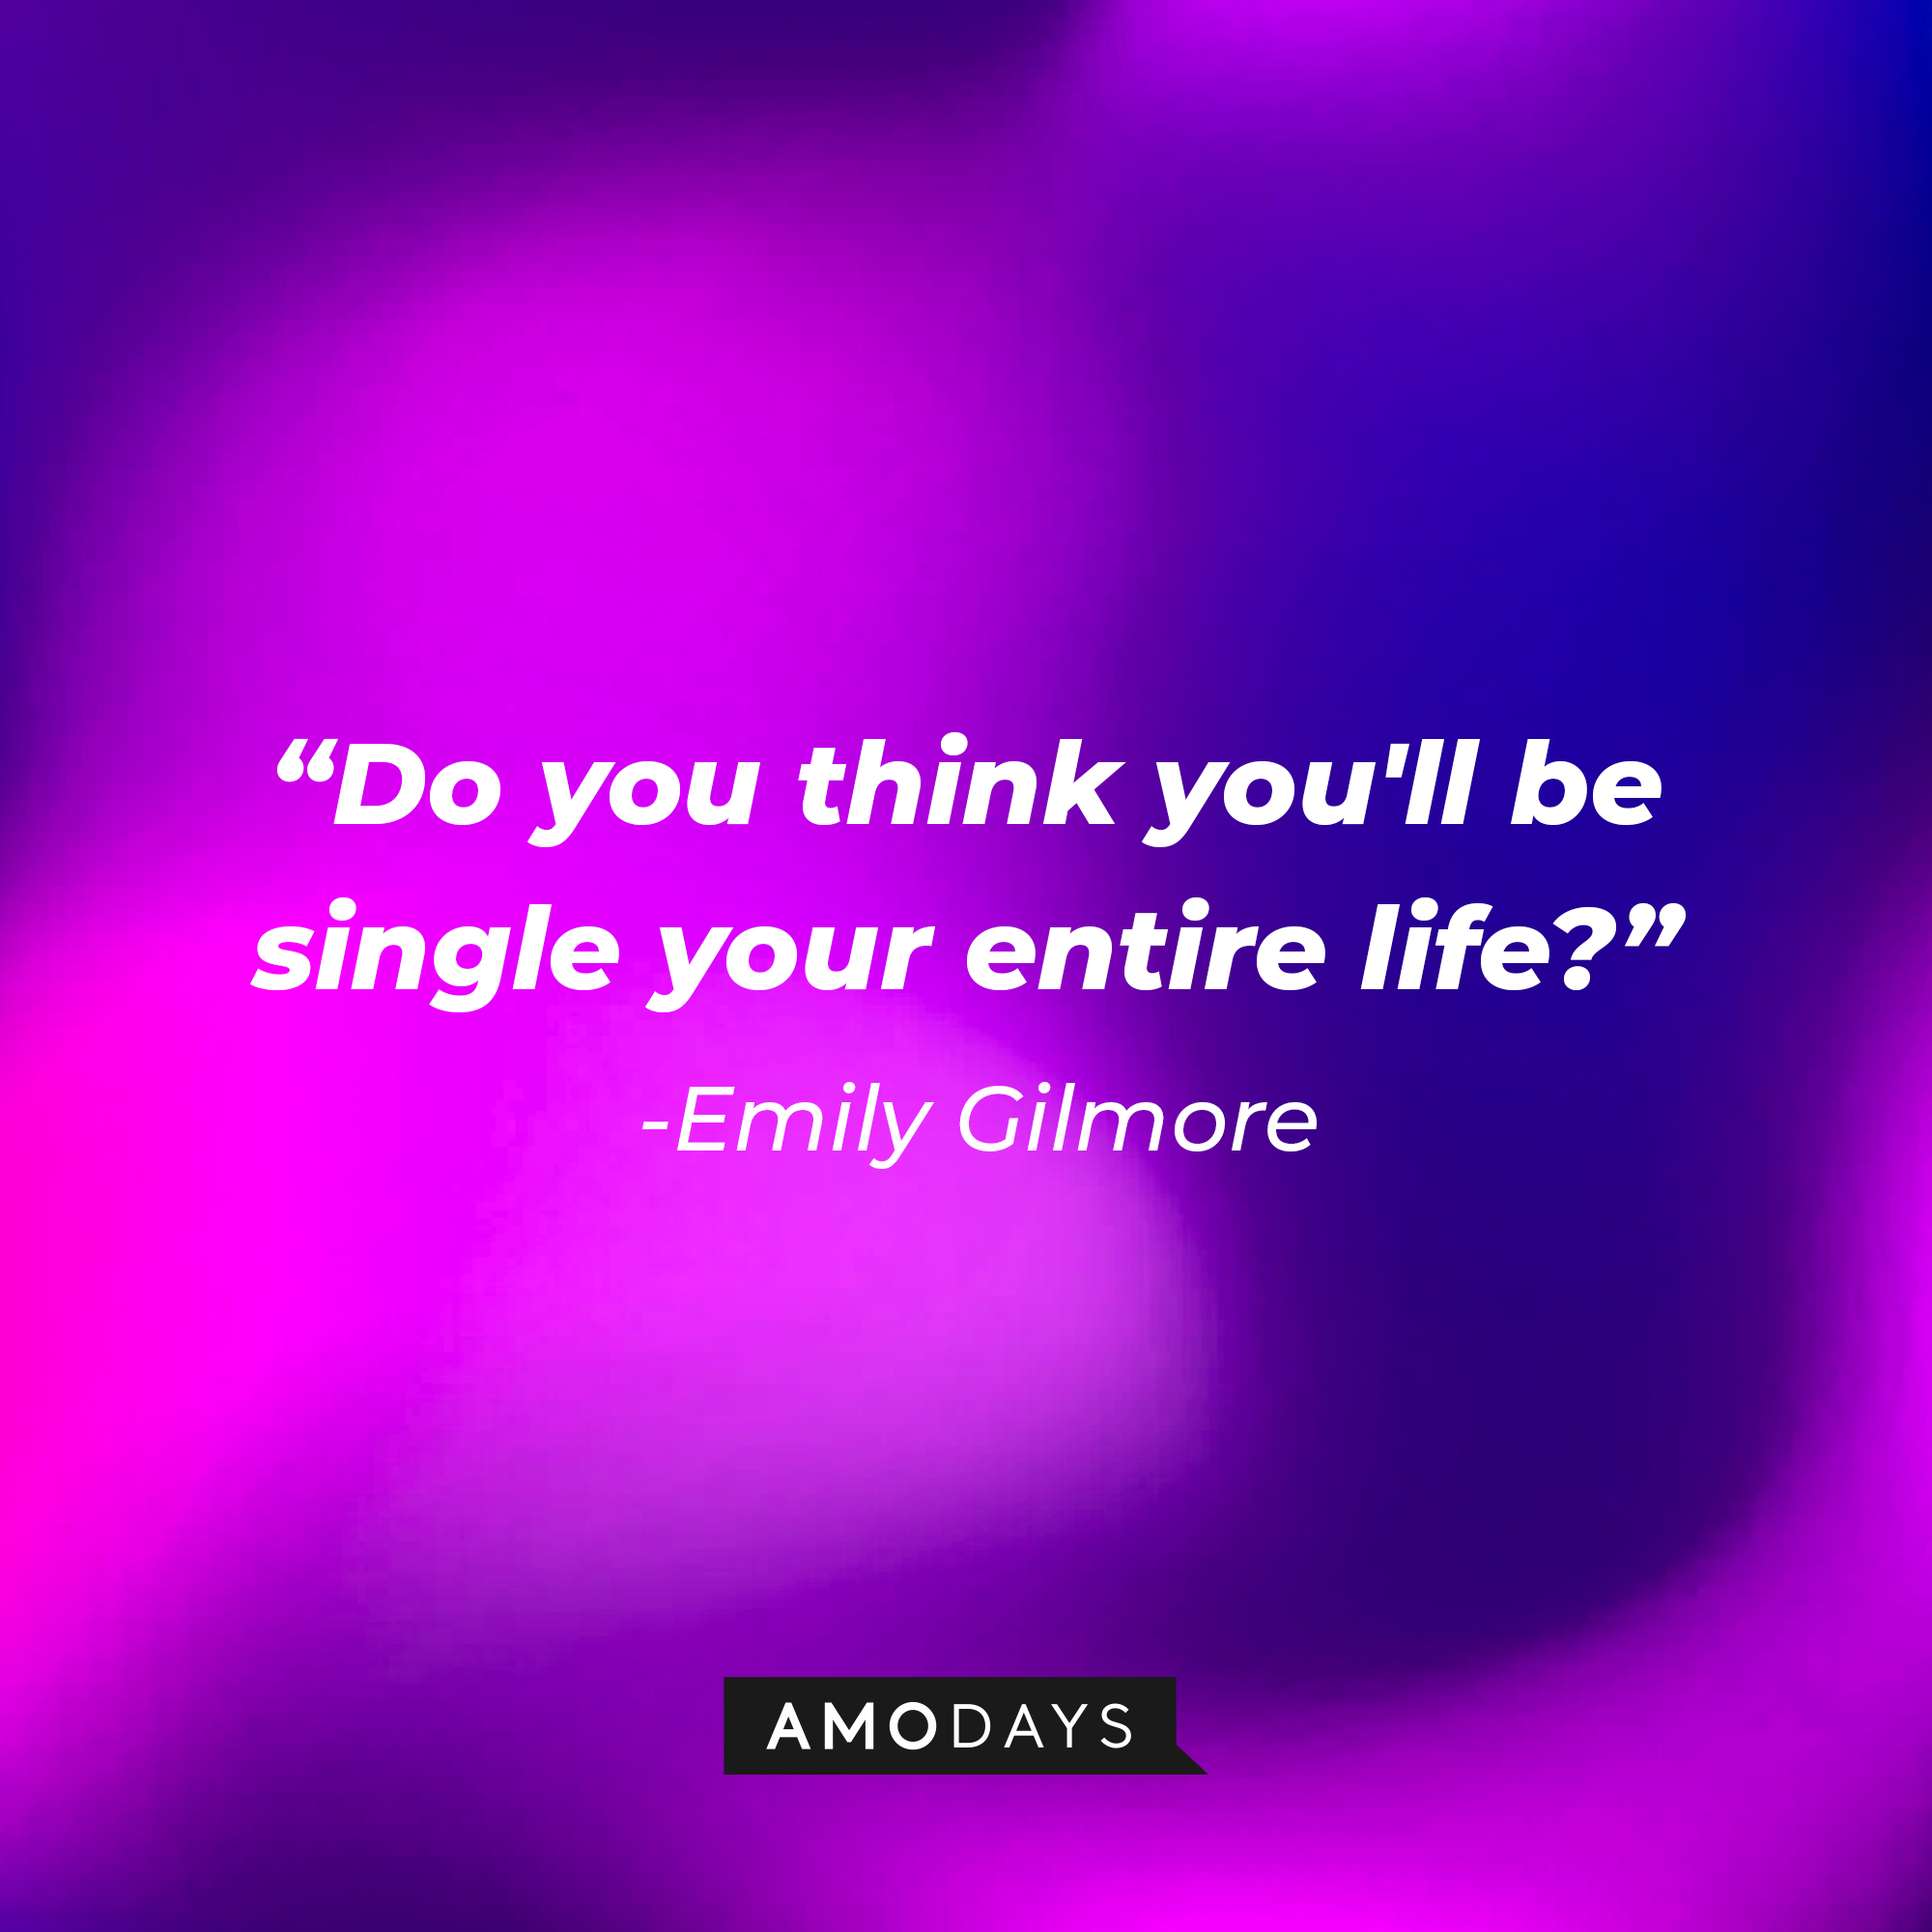 Emily Gilmore's quote: "Do you think you'll be single your entire life?" | Source: Amodays